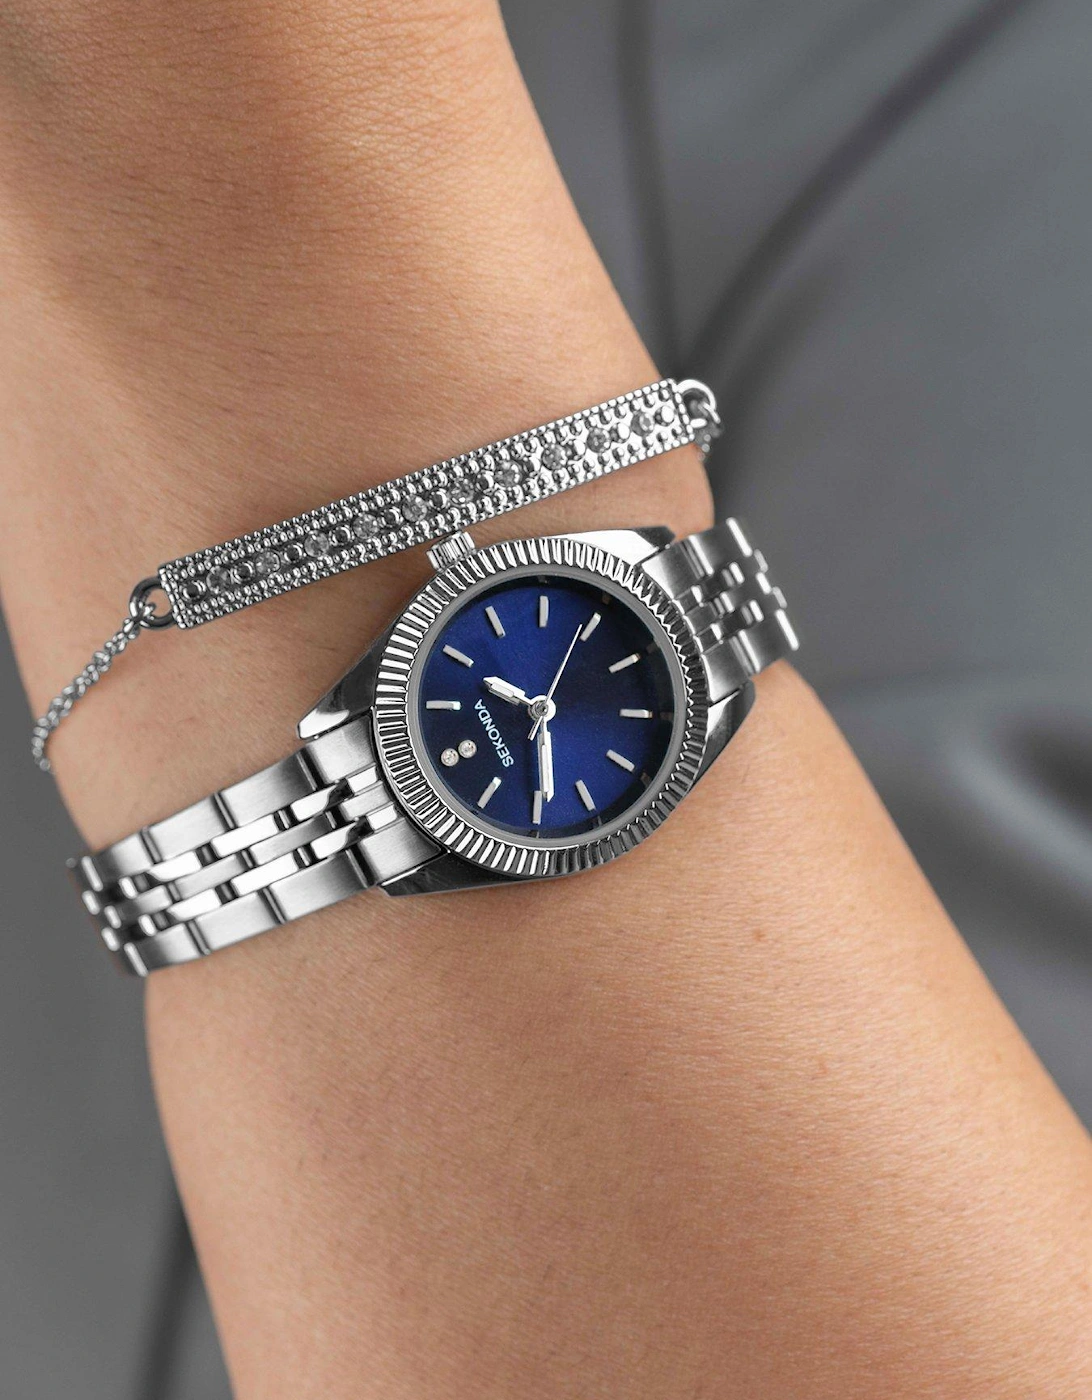 Classic Gift Set Womens 26mm Analogue Watch with Blue Dial, Silver Stainless Steel Bracelet and Stone Set Matching Bracelet